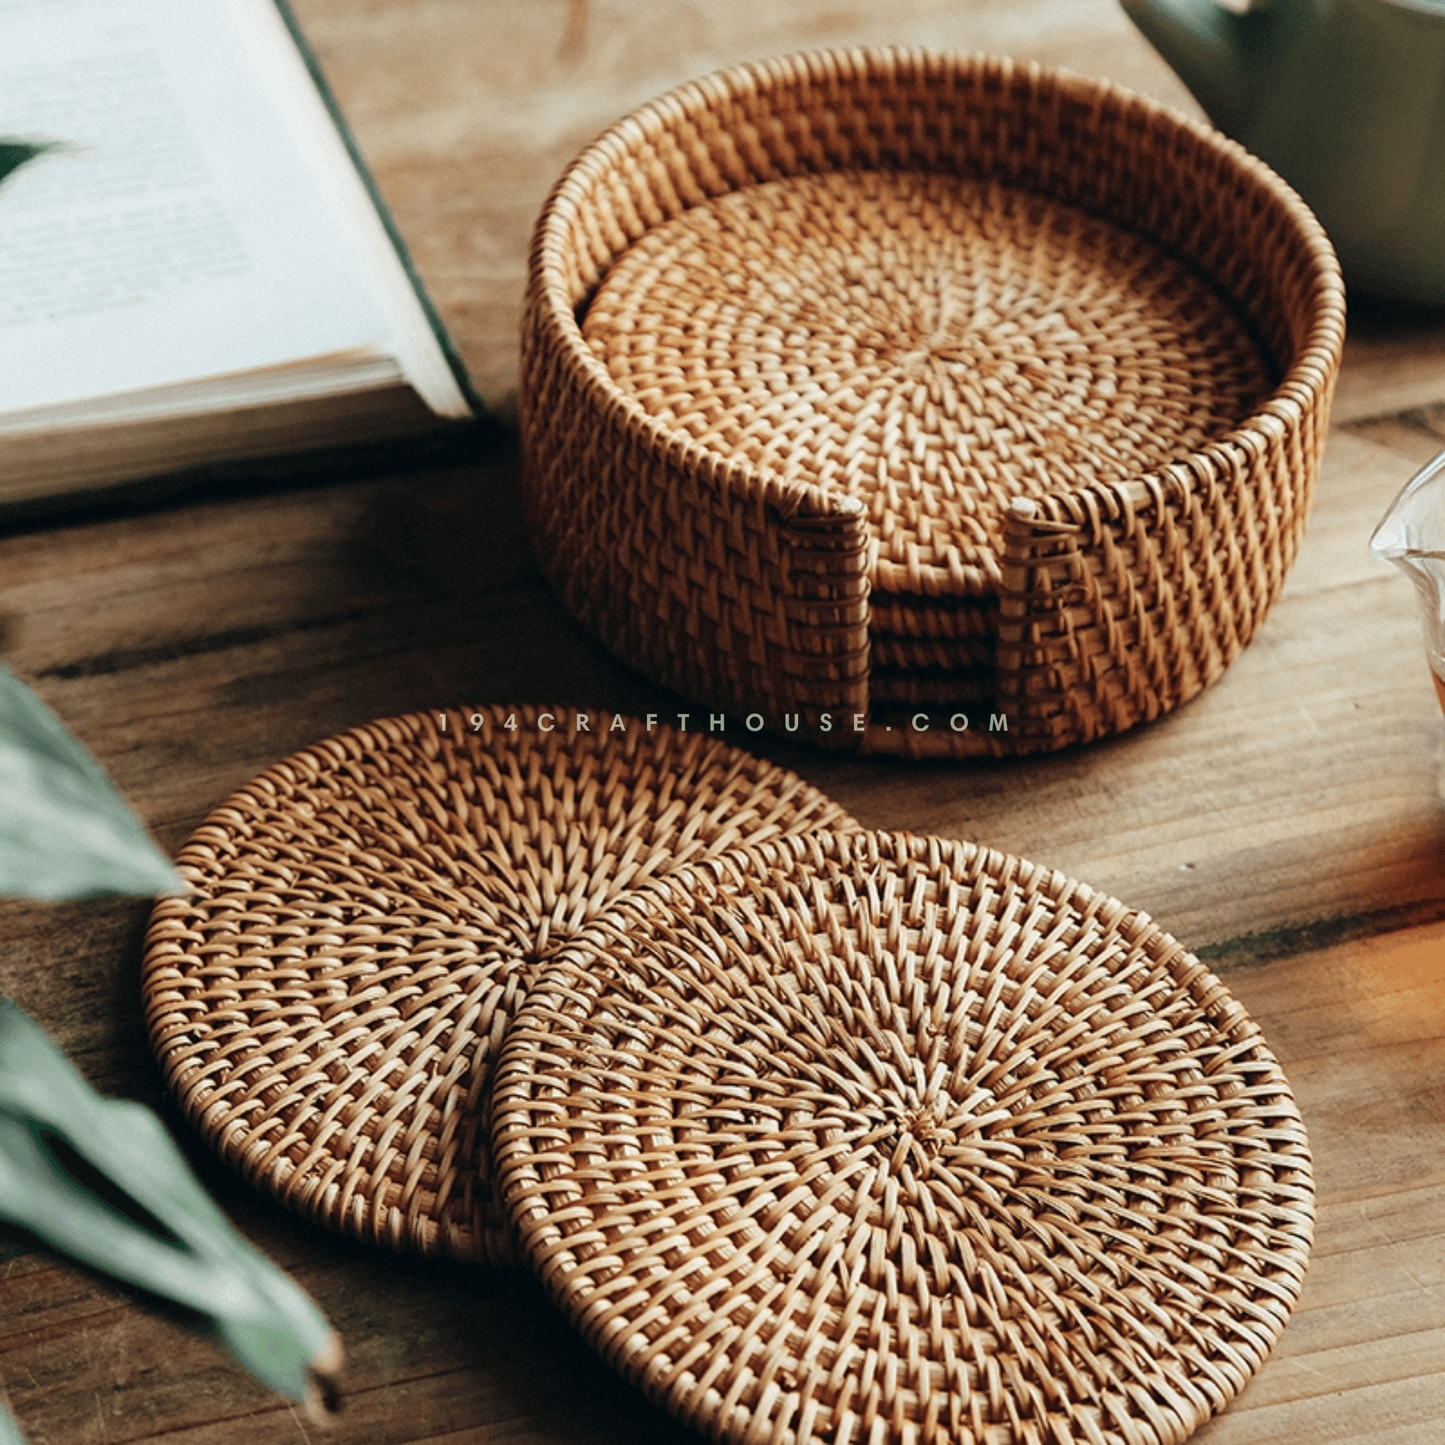 Hand-woven Round Rattan Placemats Set Of 6 With Round Holder